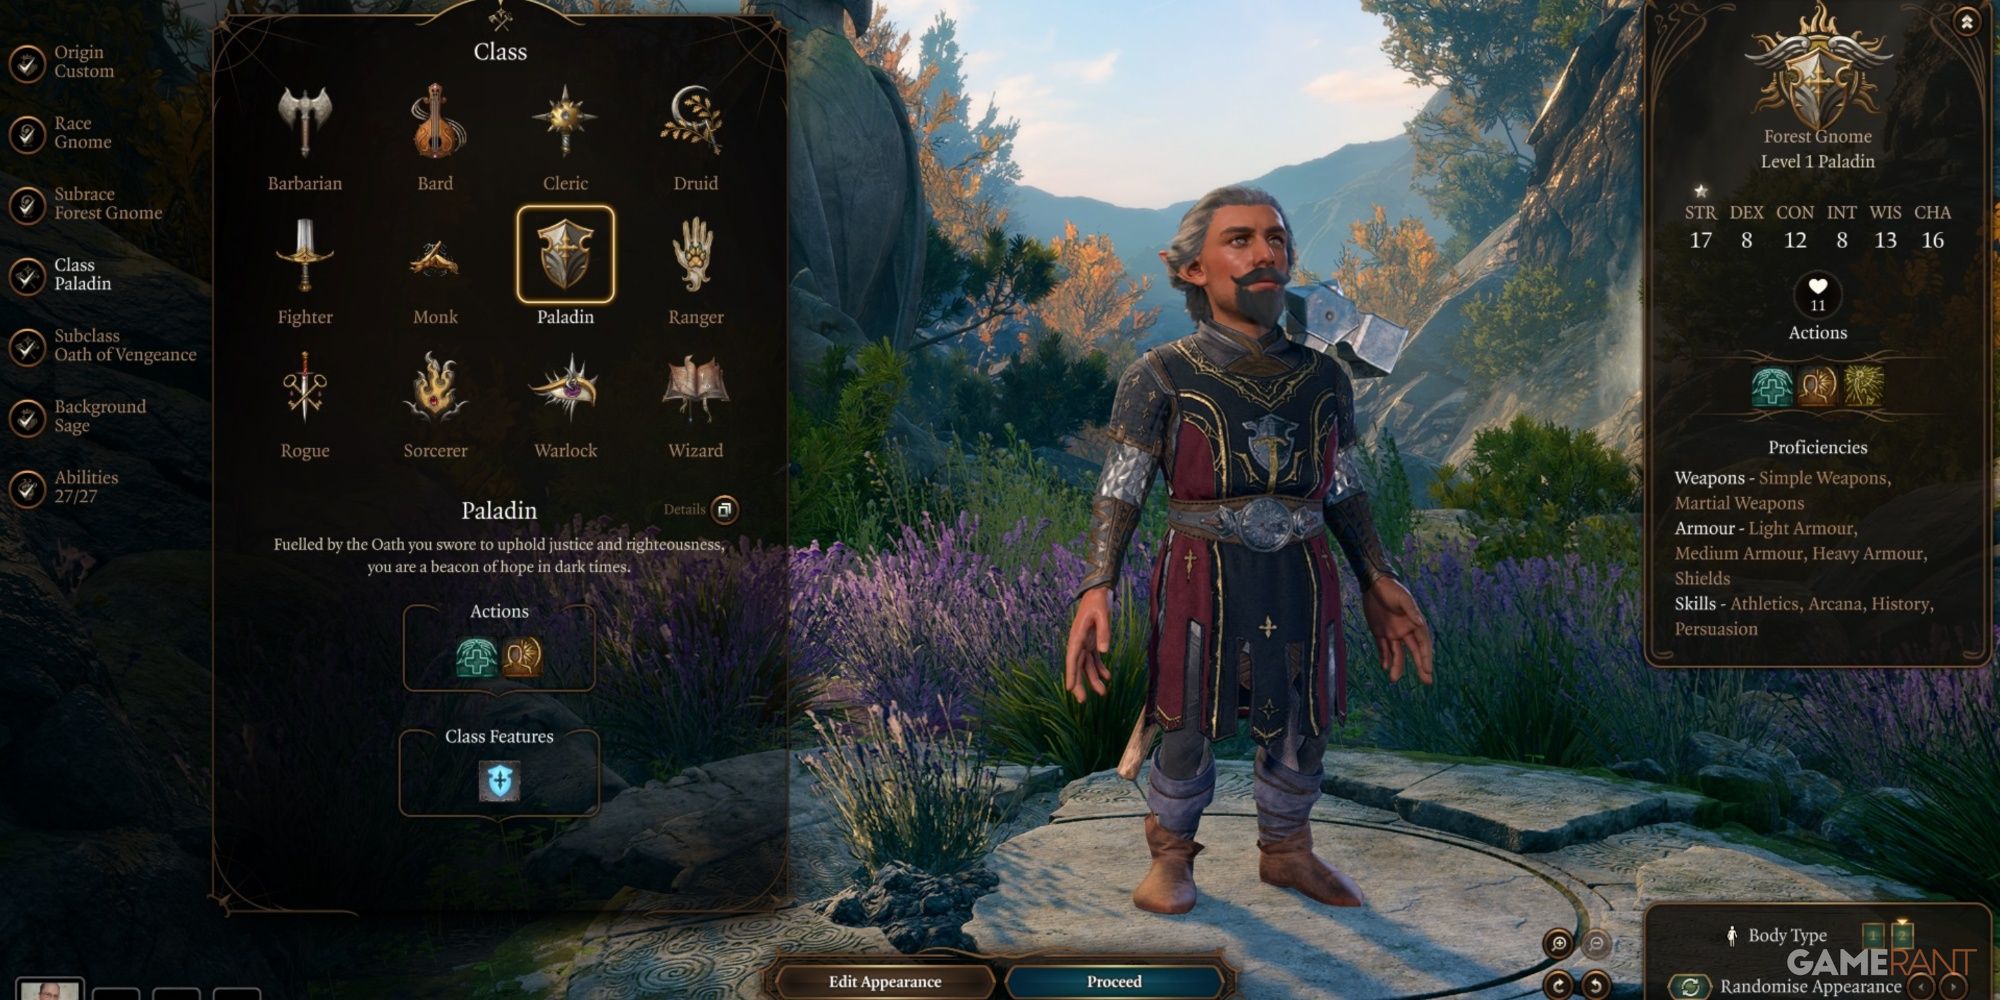 Baldur's Gate 3 Forest Gnome As A Paladin In Character Creation